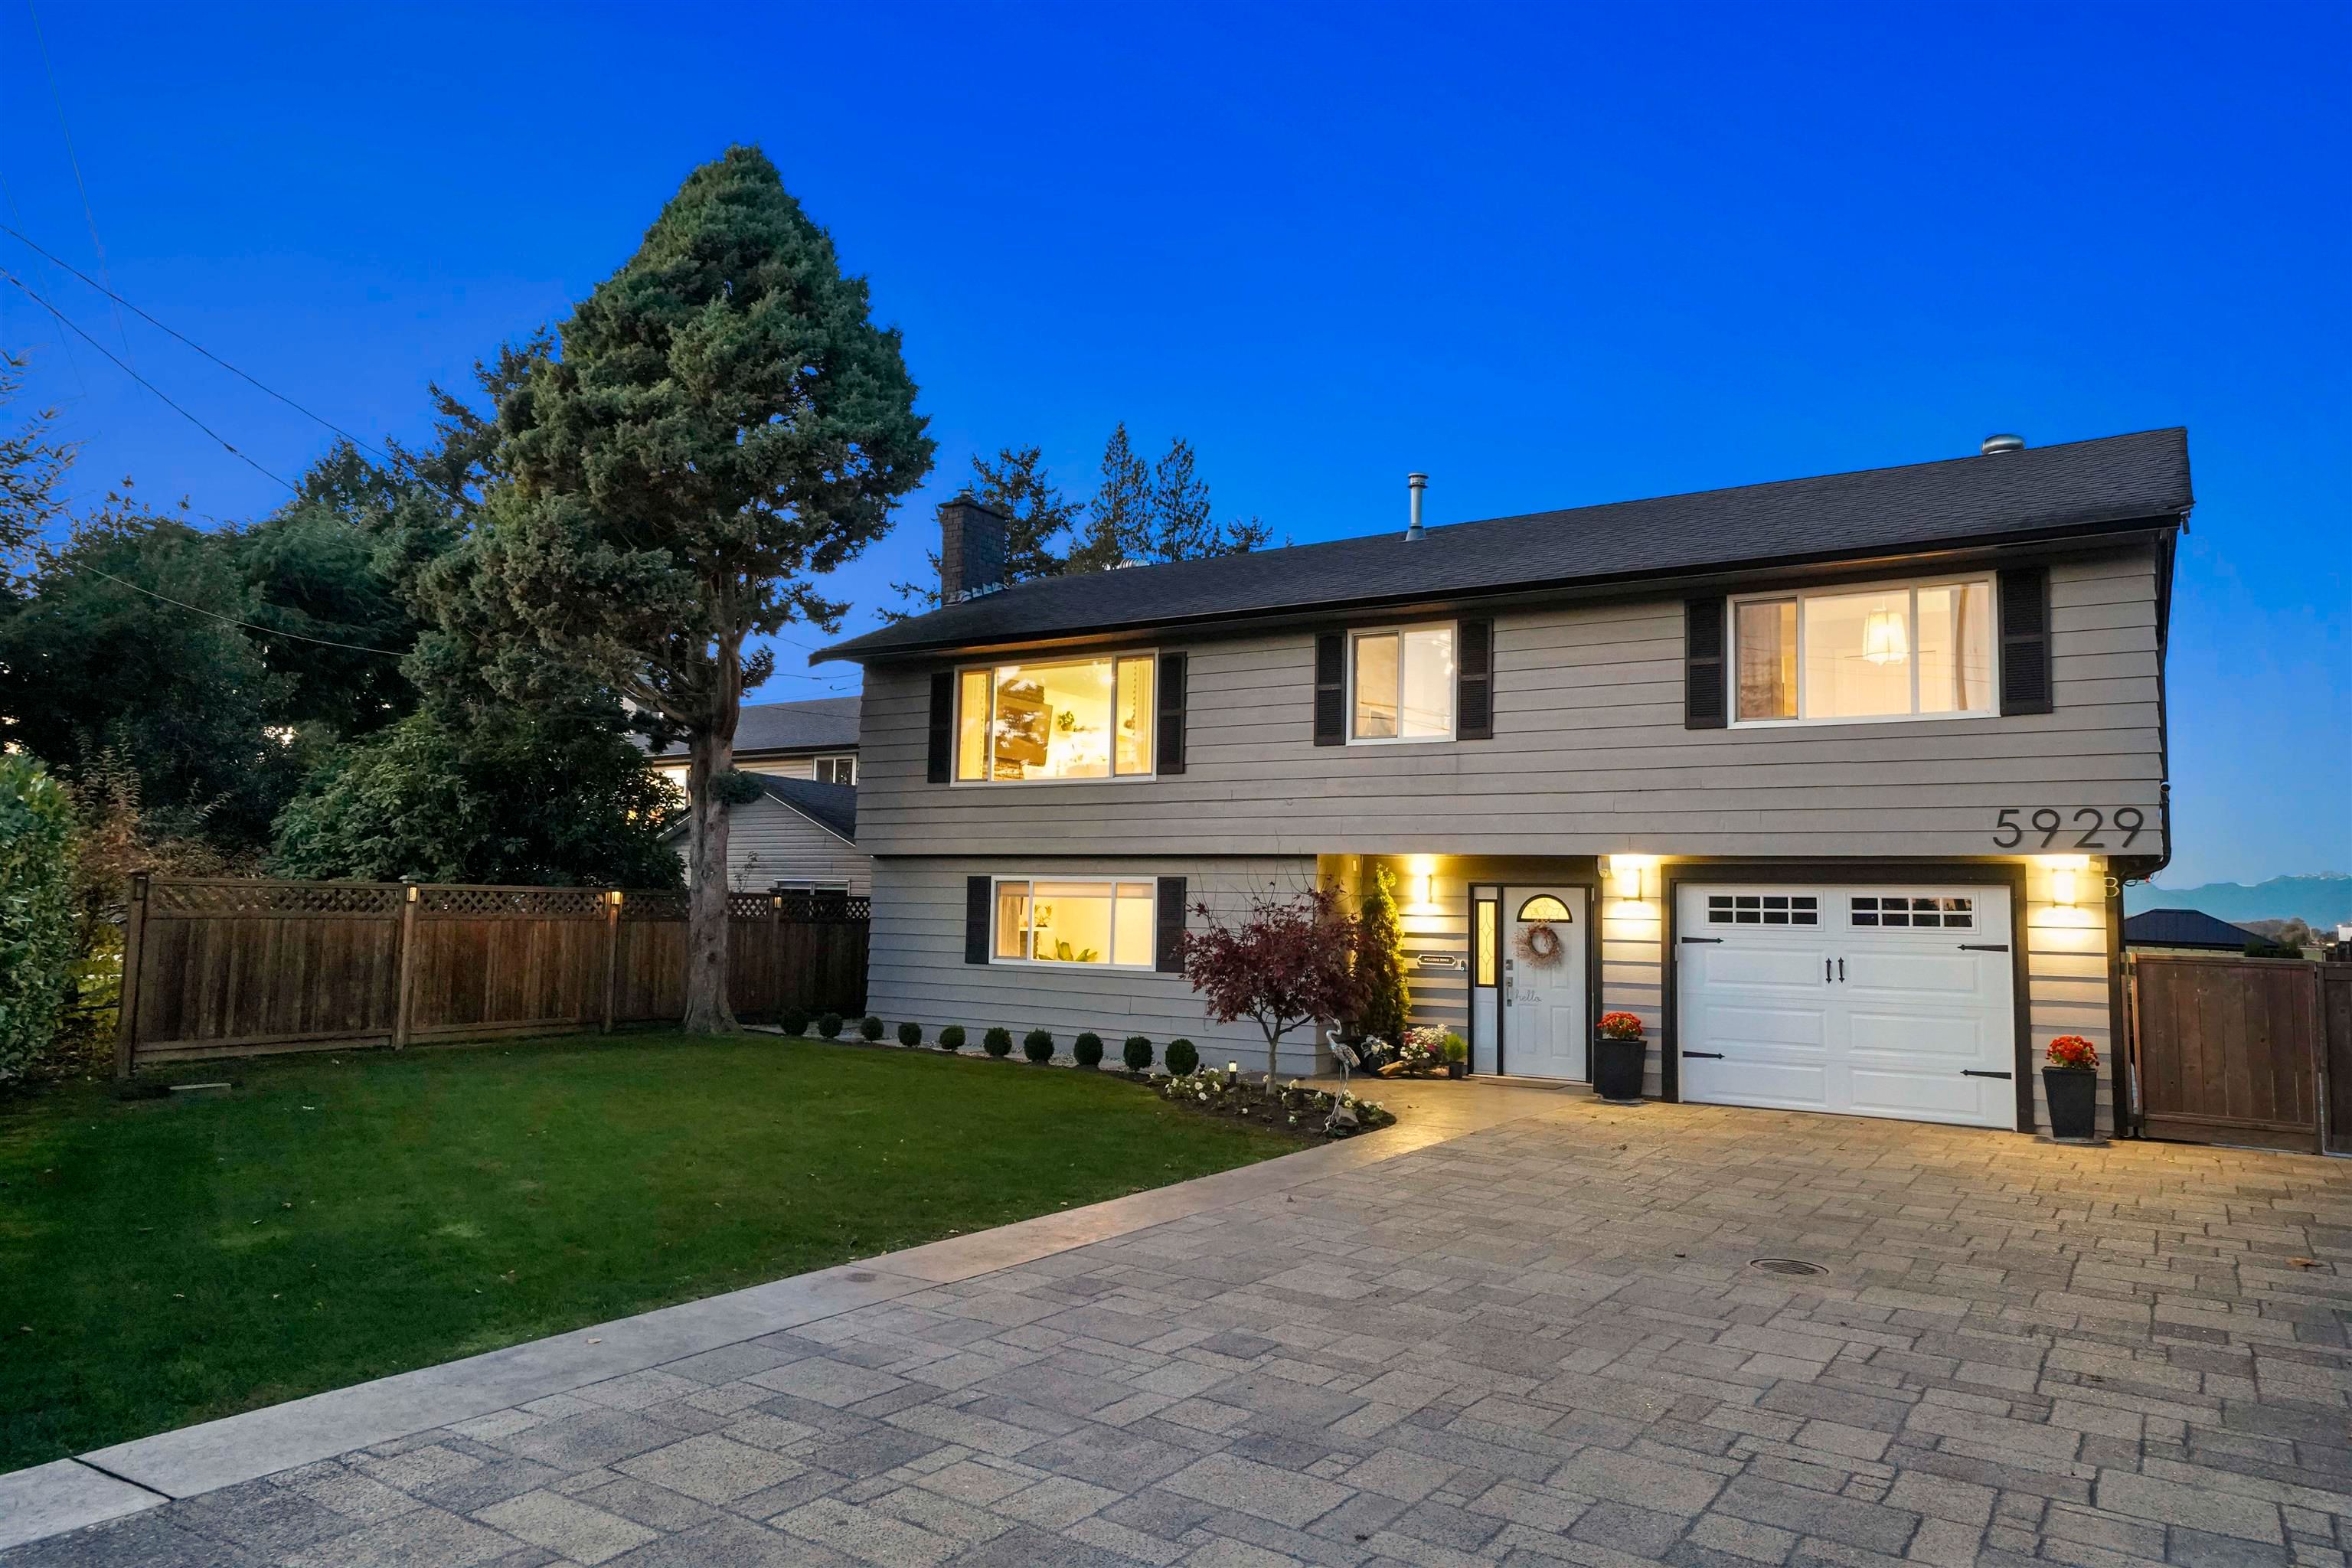 Photo 36: Photos: 5929 CRESCENT DRIVE in Delta: Hawthorne House for sale (Ladner)  : MLS®# R2629599